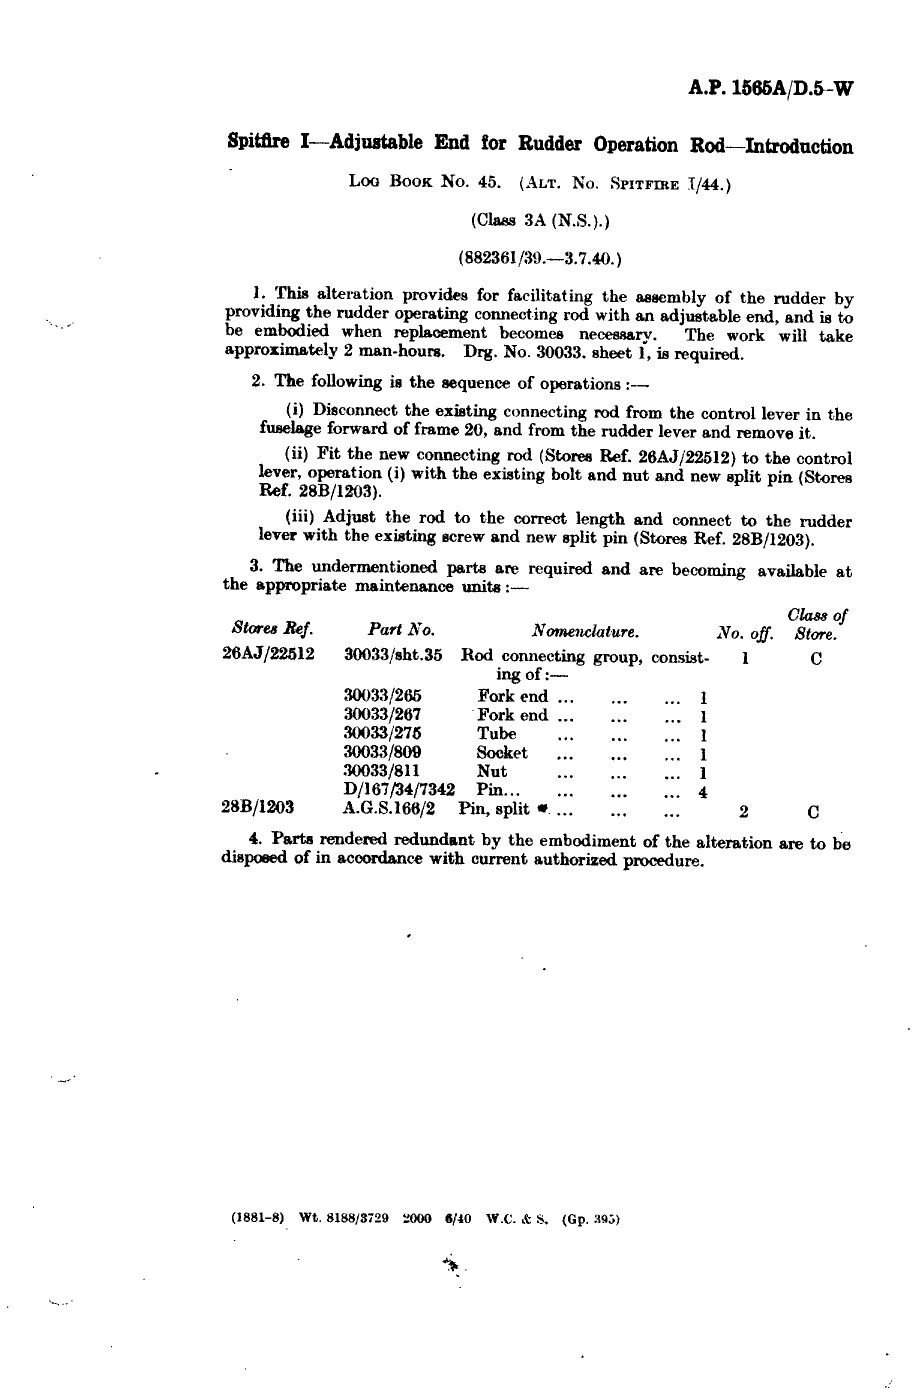 Sample page 1 from AirCorps Library document: Spitfire I Adjustable End for Rudder Operation Rod Introduction